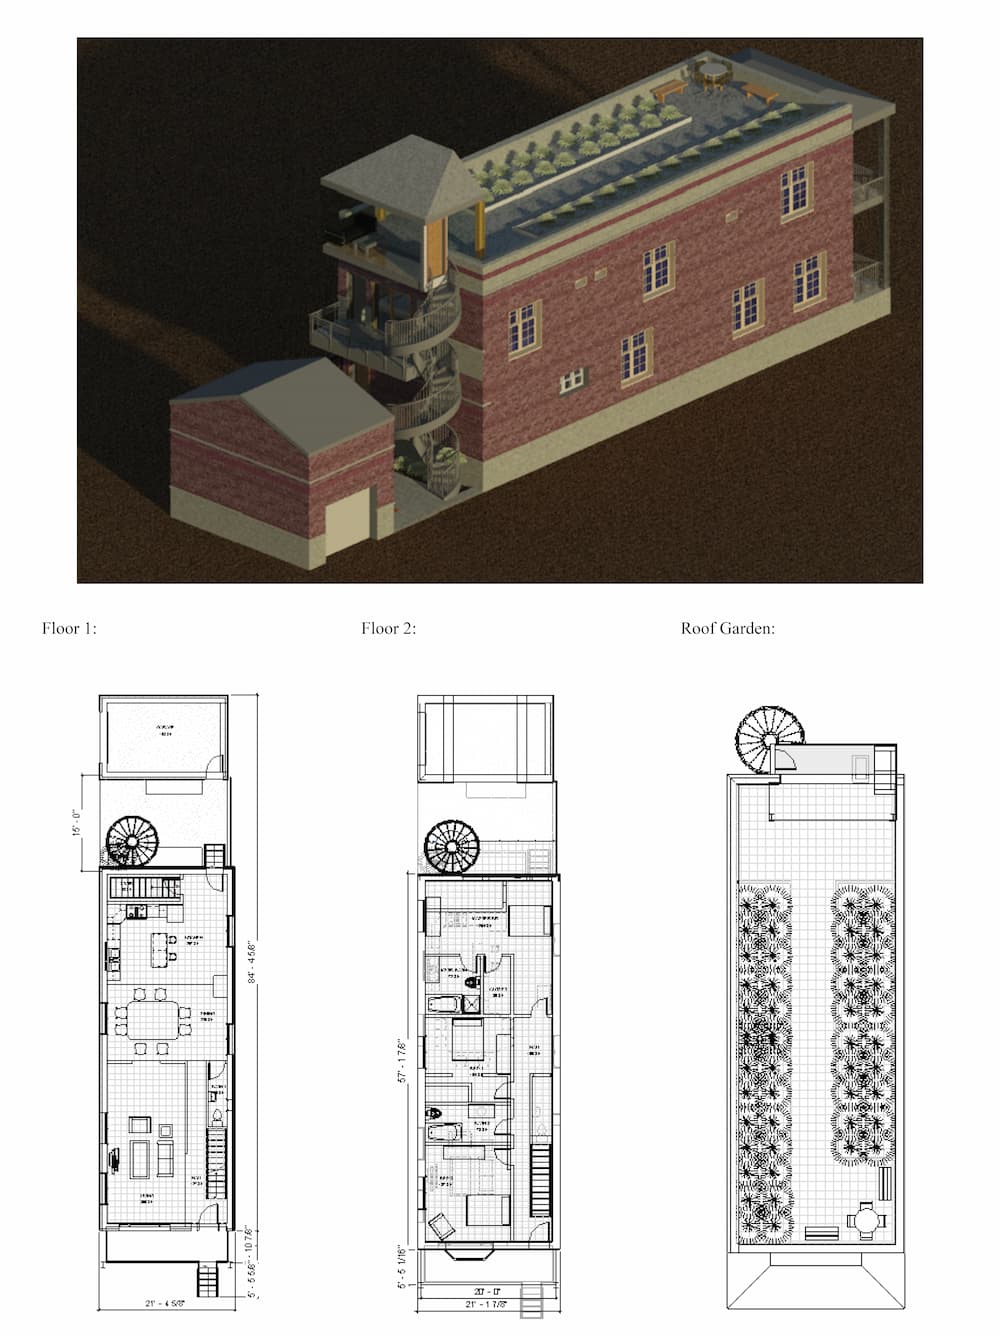 Image of a student building design